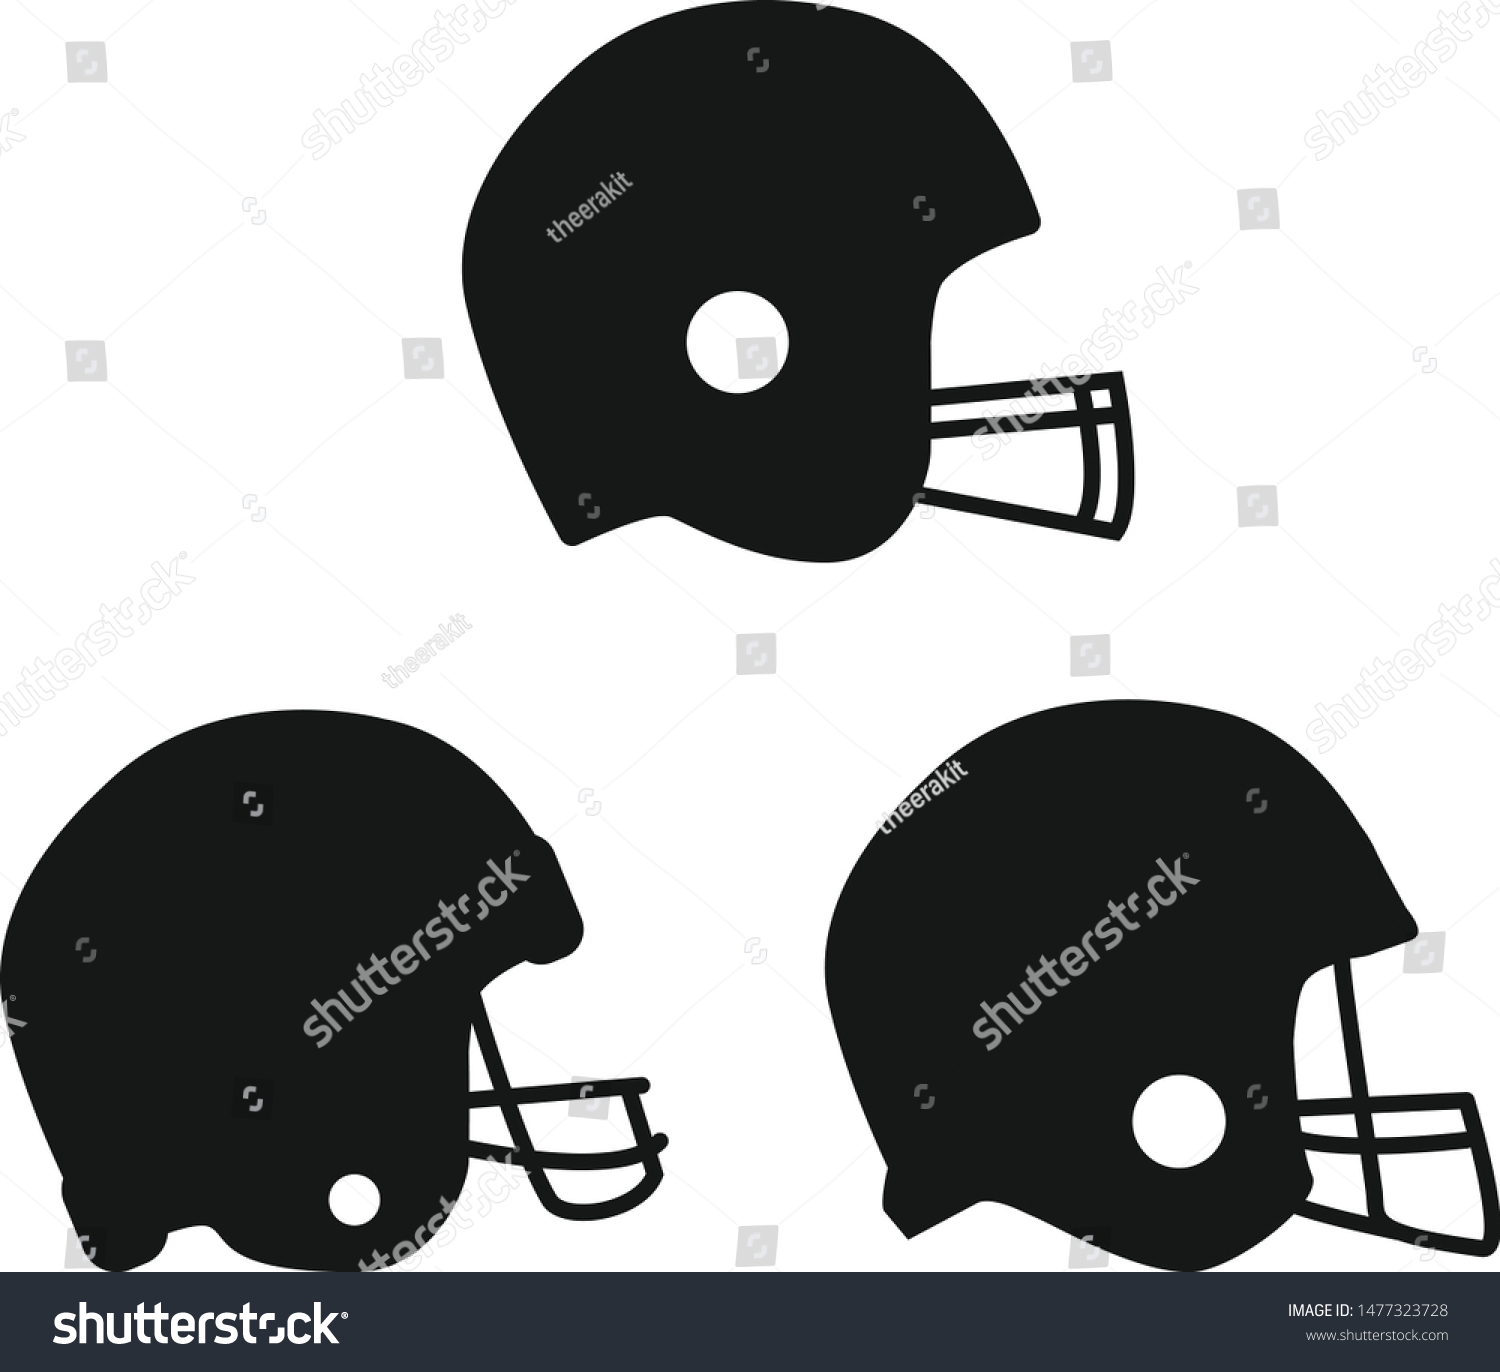 Football Helmet Icon On White Background Stock Vector (Royalty Free ...